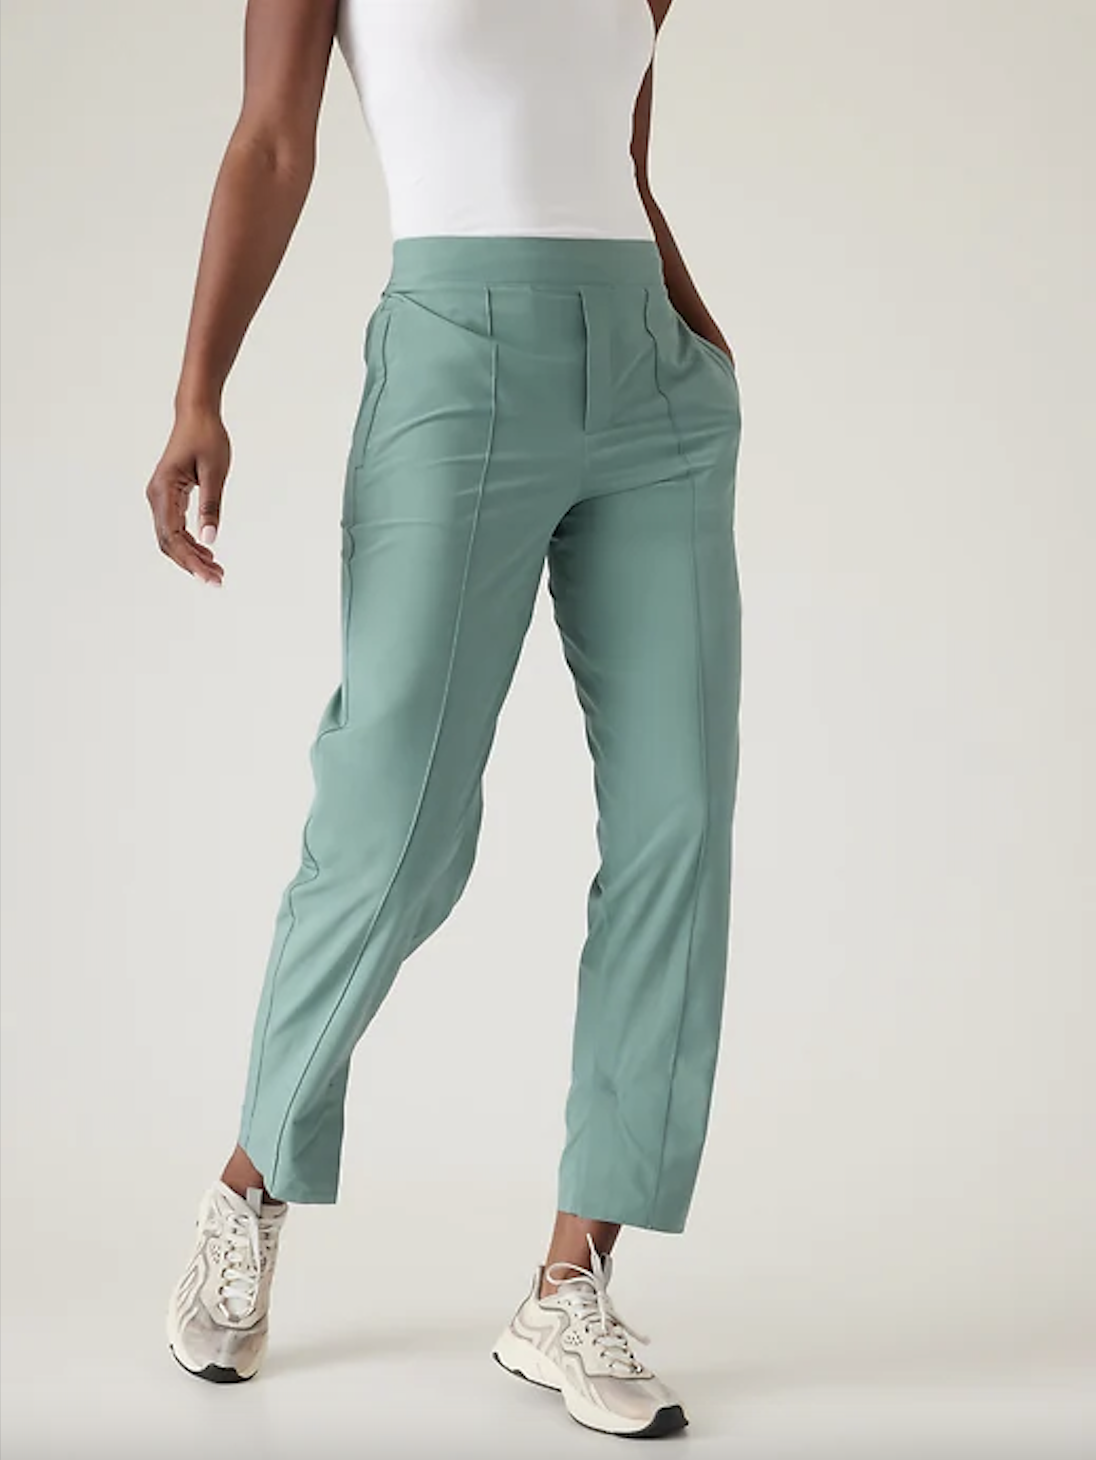 11 Best Work Pants for Women to Nail the Boardroom Aesthetic! | PINKVILLA